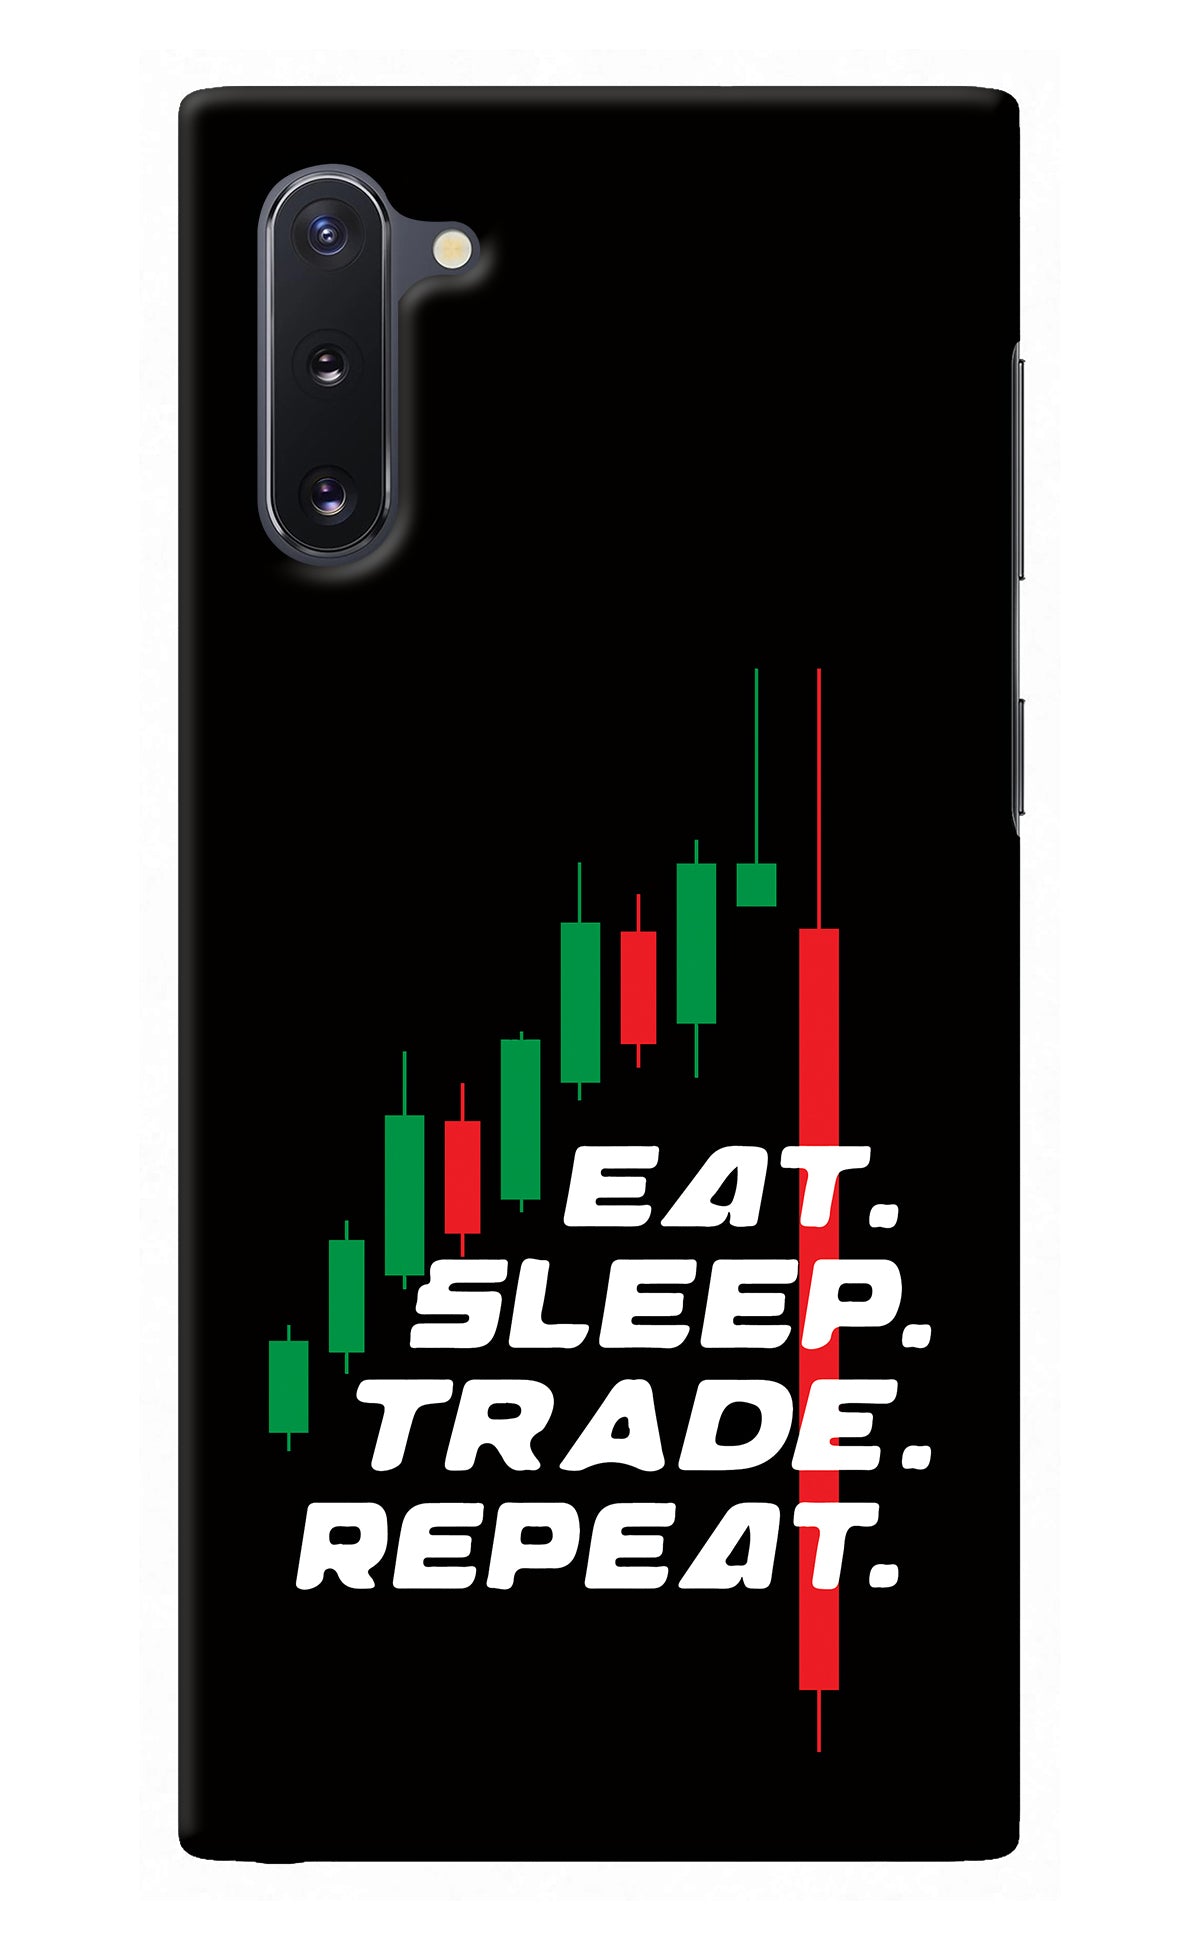 Eat Sleep Trade Repeat Samsung Note 10 Back Cover